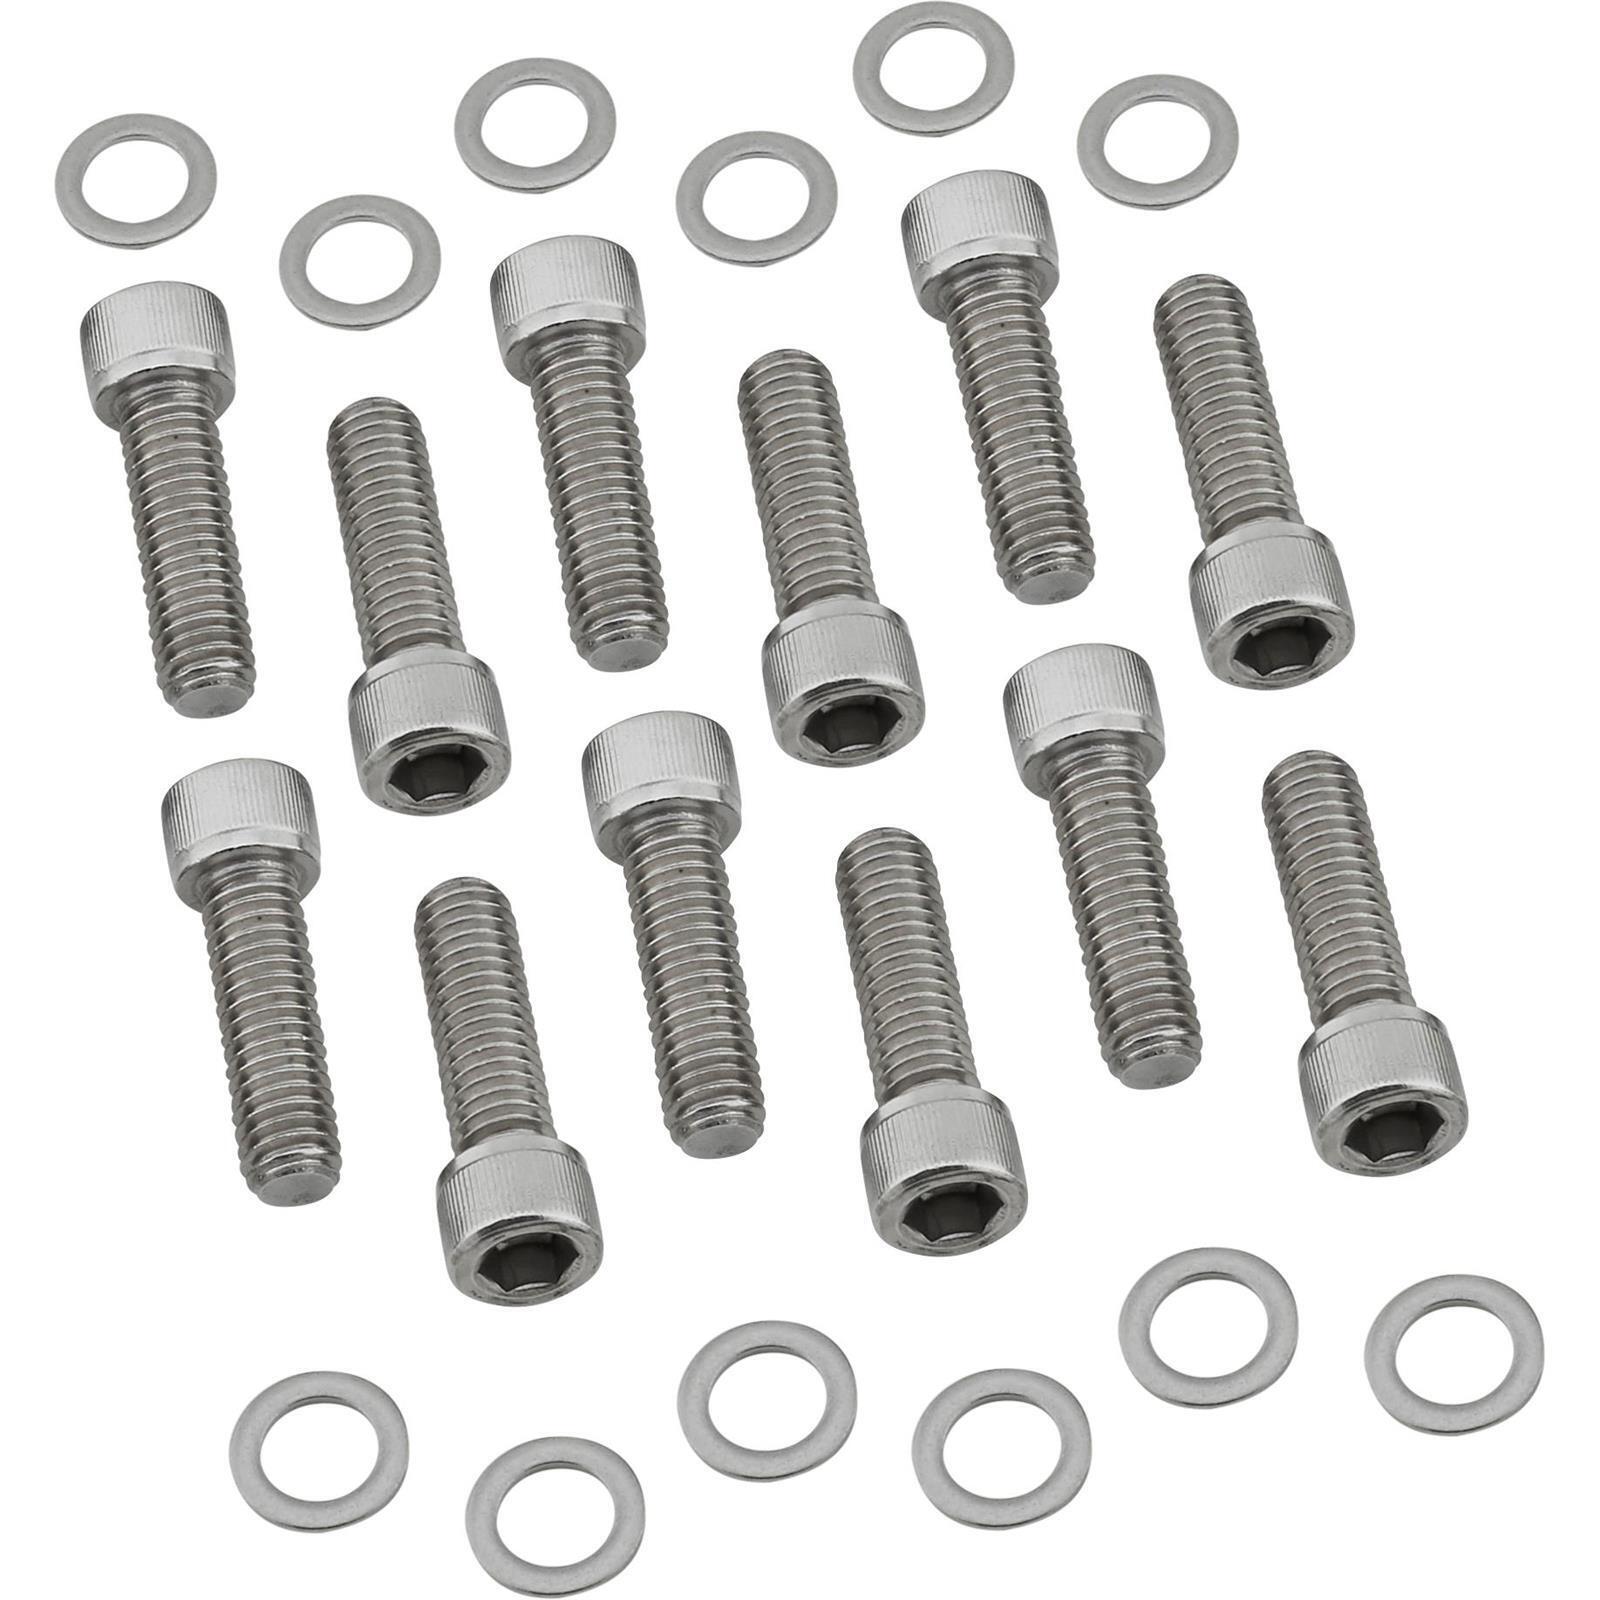 Stainless Steel Intake Bolt Kits, Fits Chevy Small Block